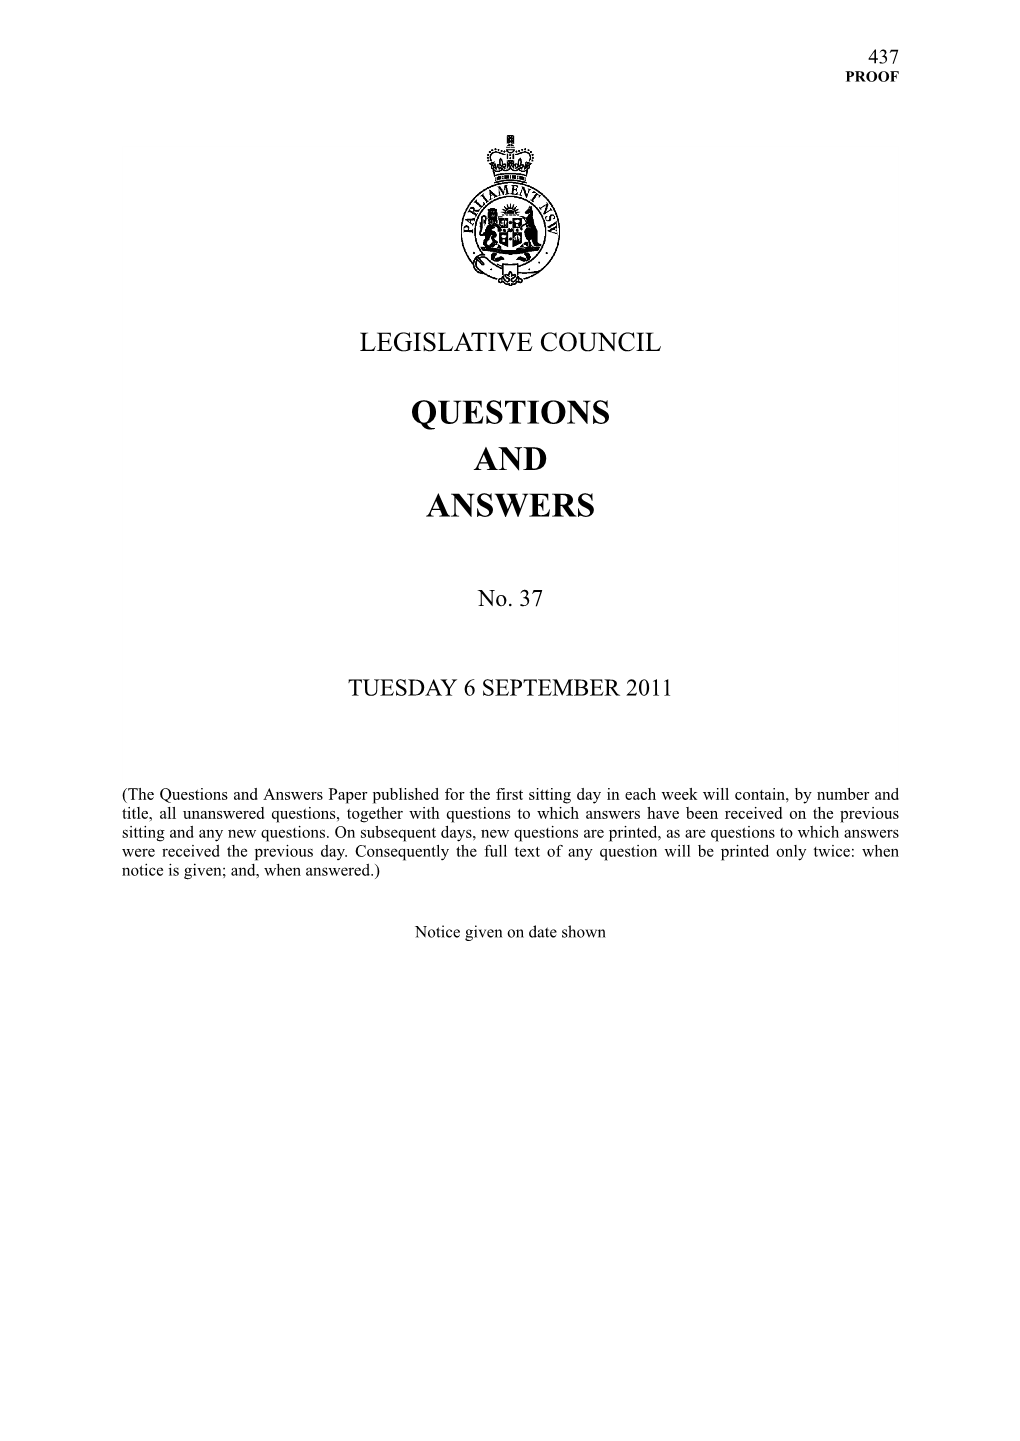 Questions & Answers Paper No. 37